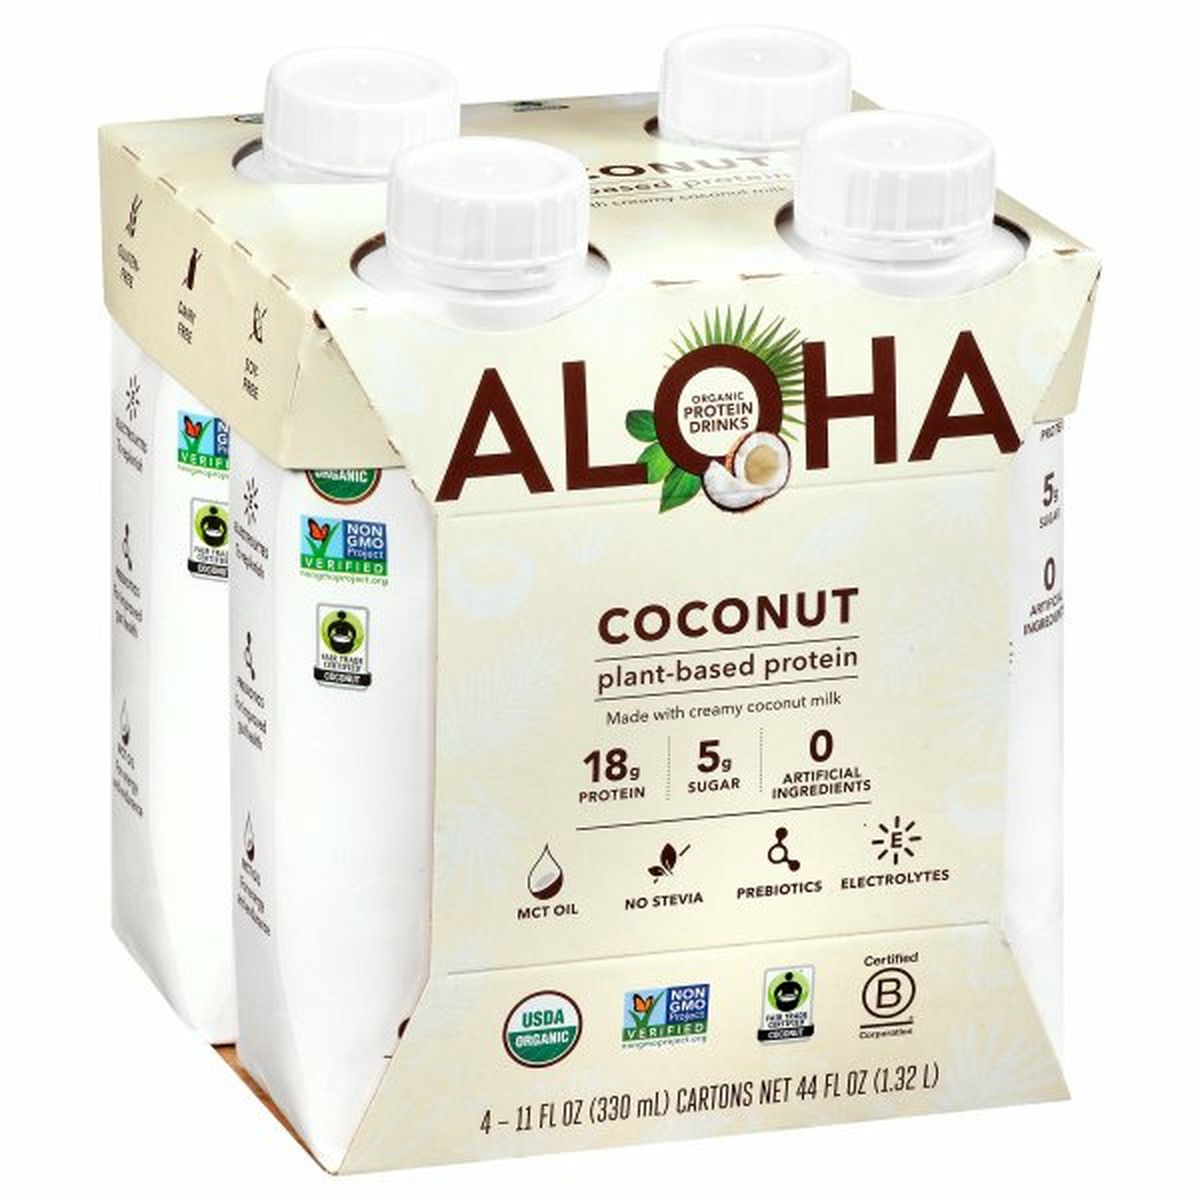 Calories in Aloha Protein Drink, Organic, Coconut, 4 Pack